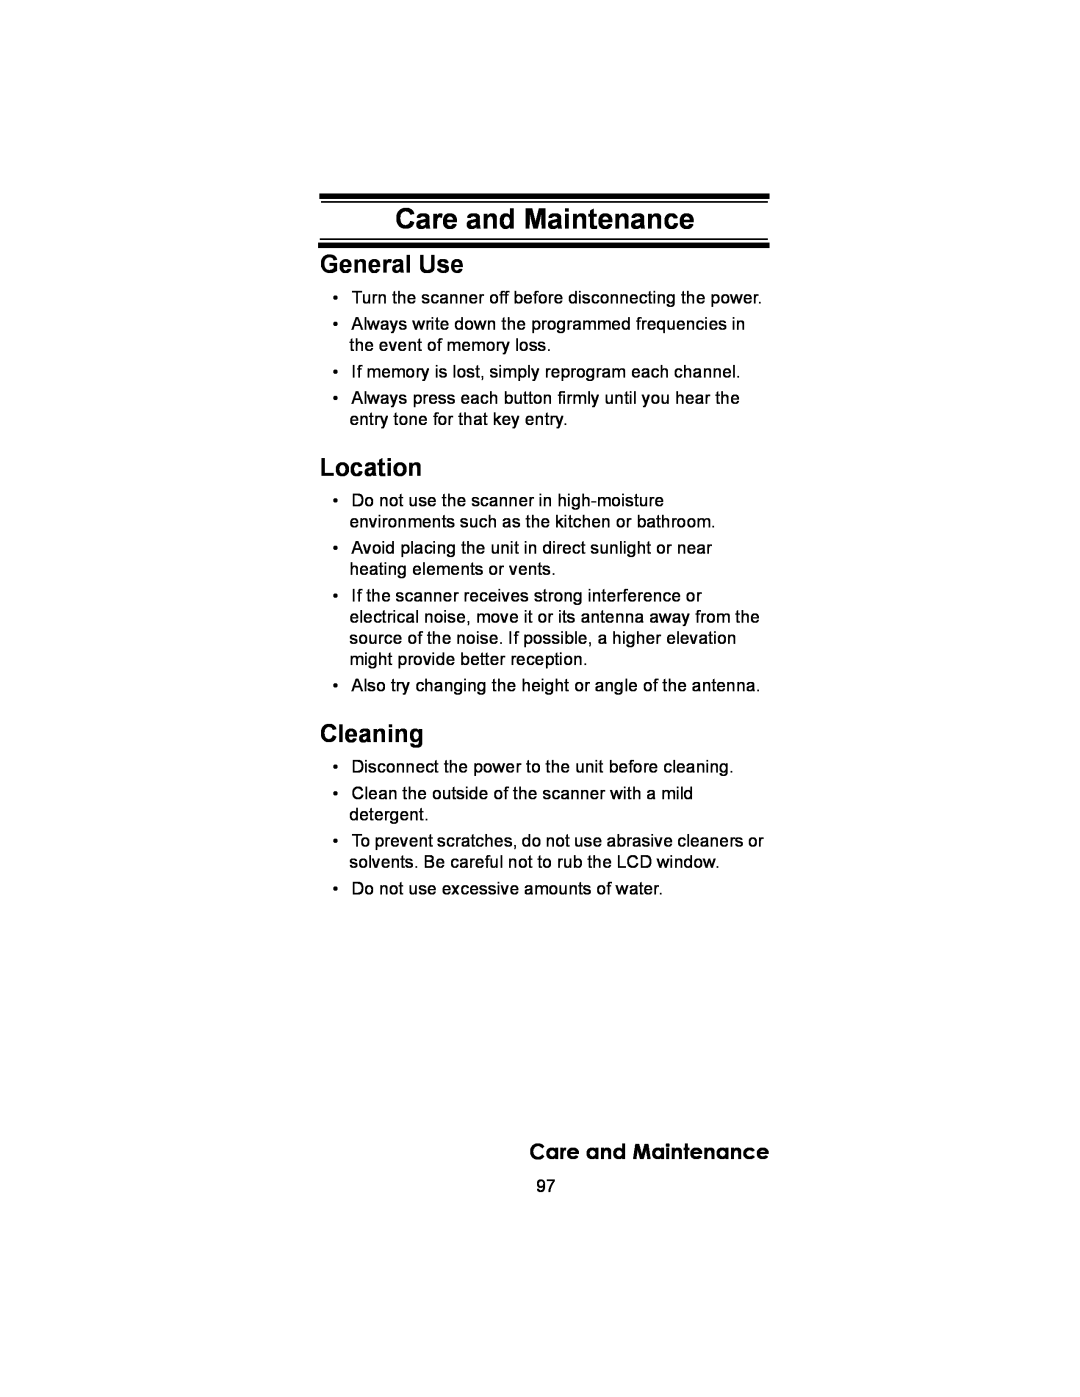 Uniden BC246T owner manual Care and Maintenance, General Use, Location, Cleaning 